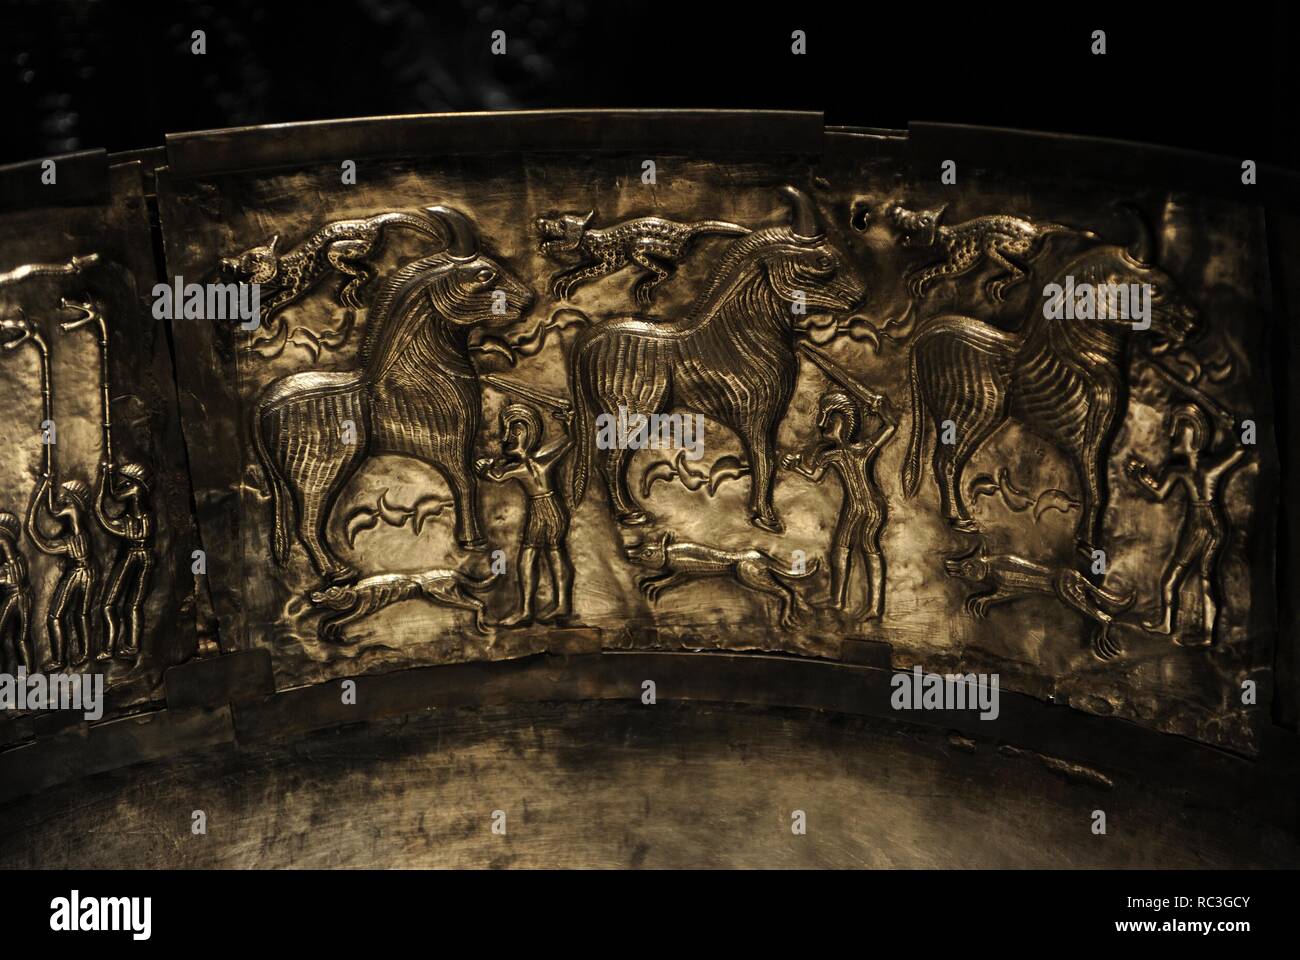 Gundestrup Cauldron High Resolution Stock Photography and Images - Alamy